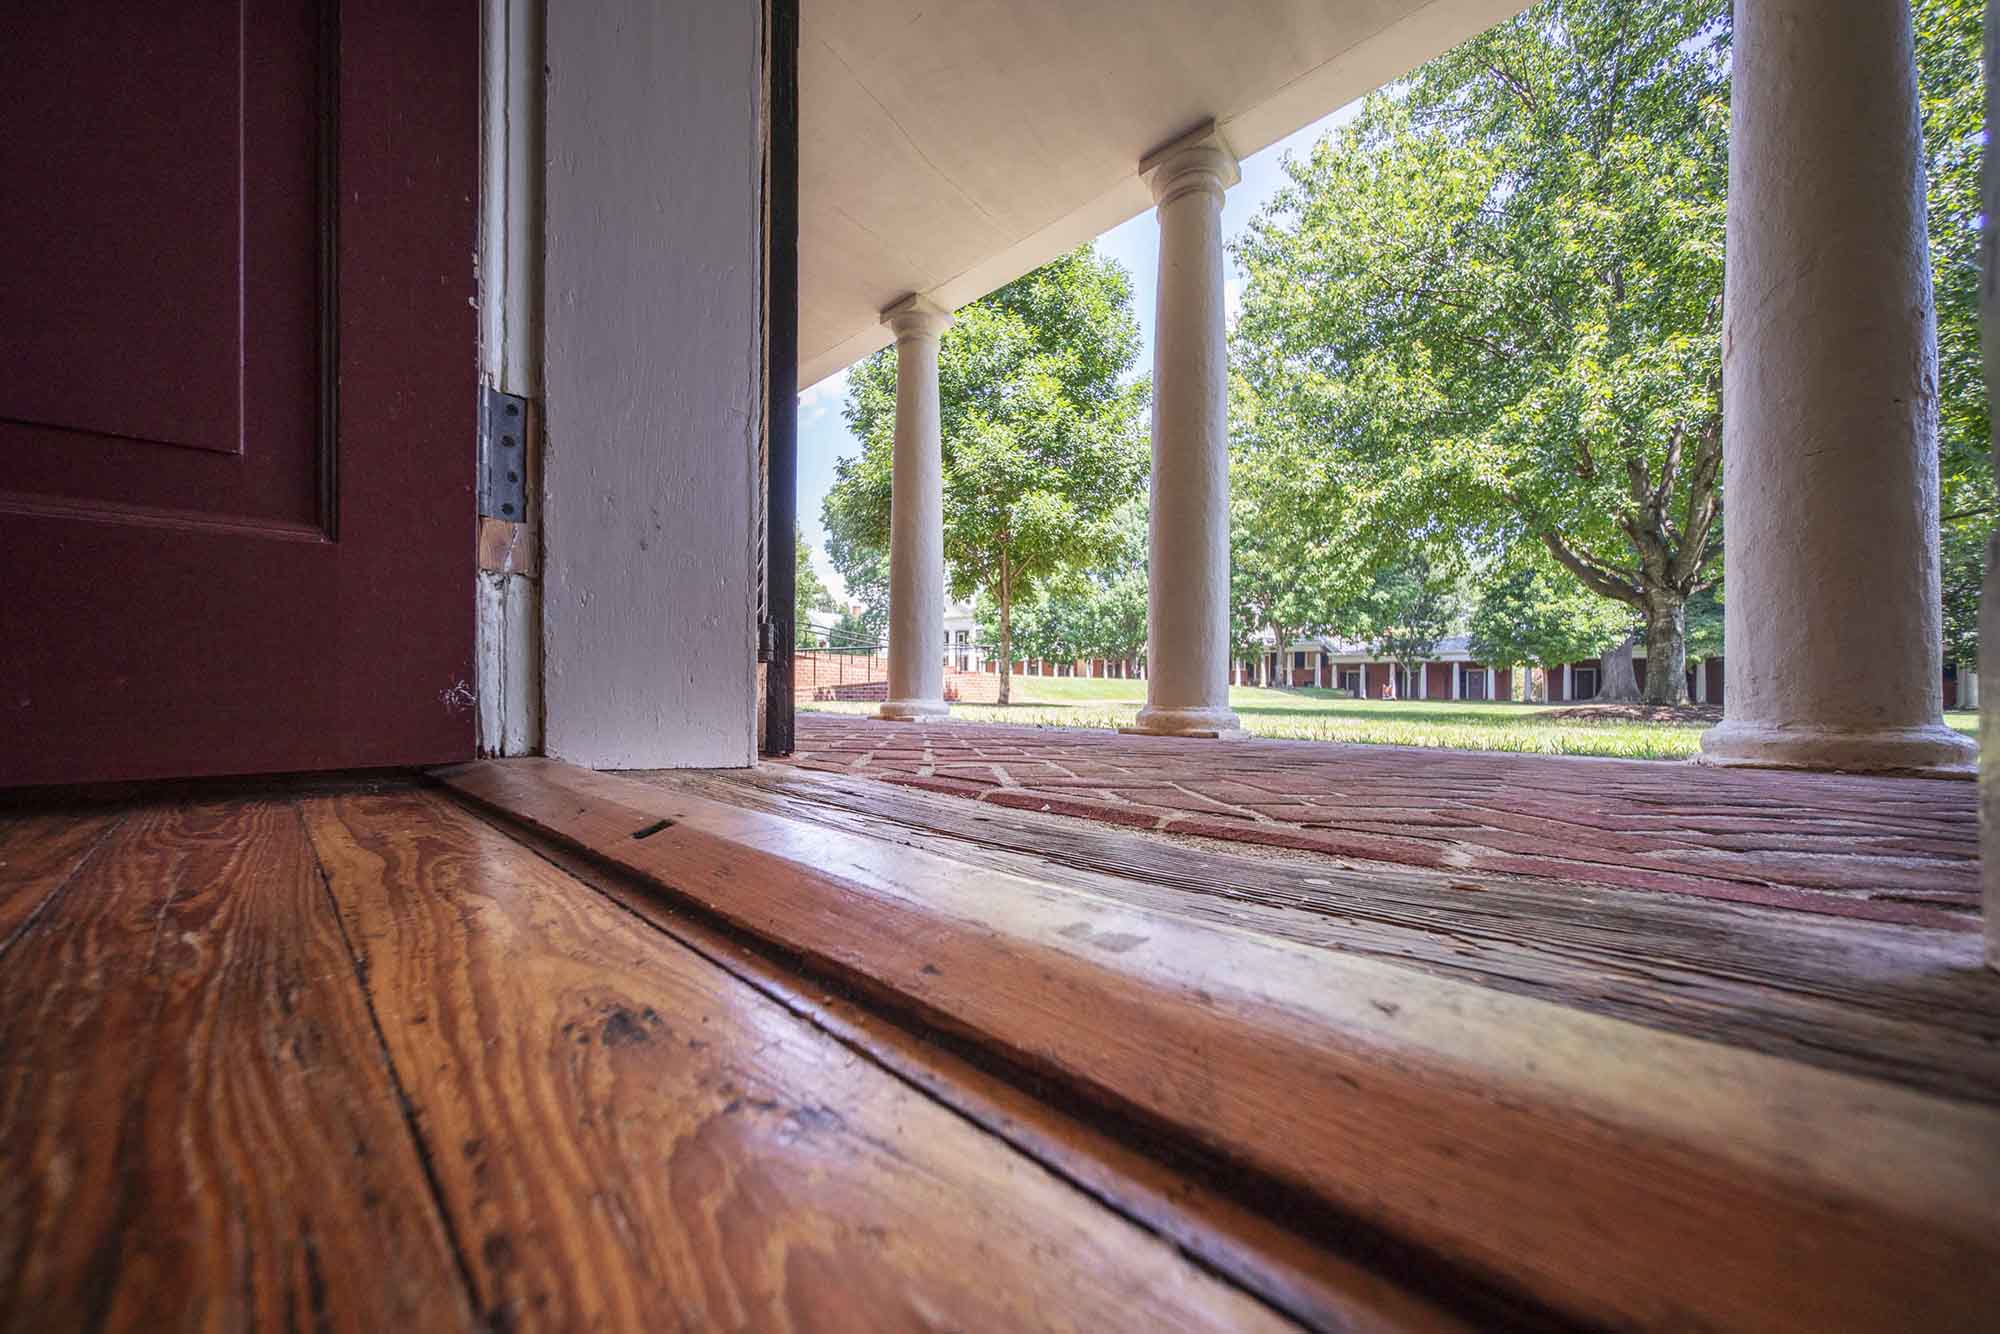 Wood floor at the entrance of the Lawn room facing the outside to the brick walkway in front